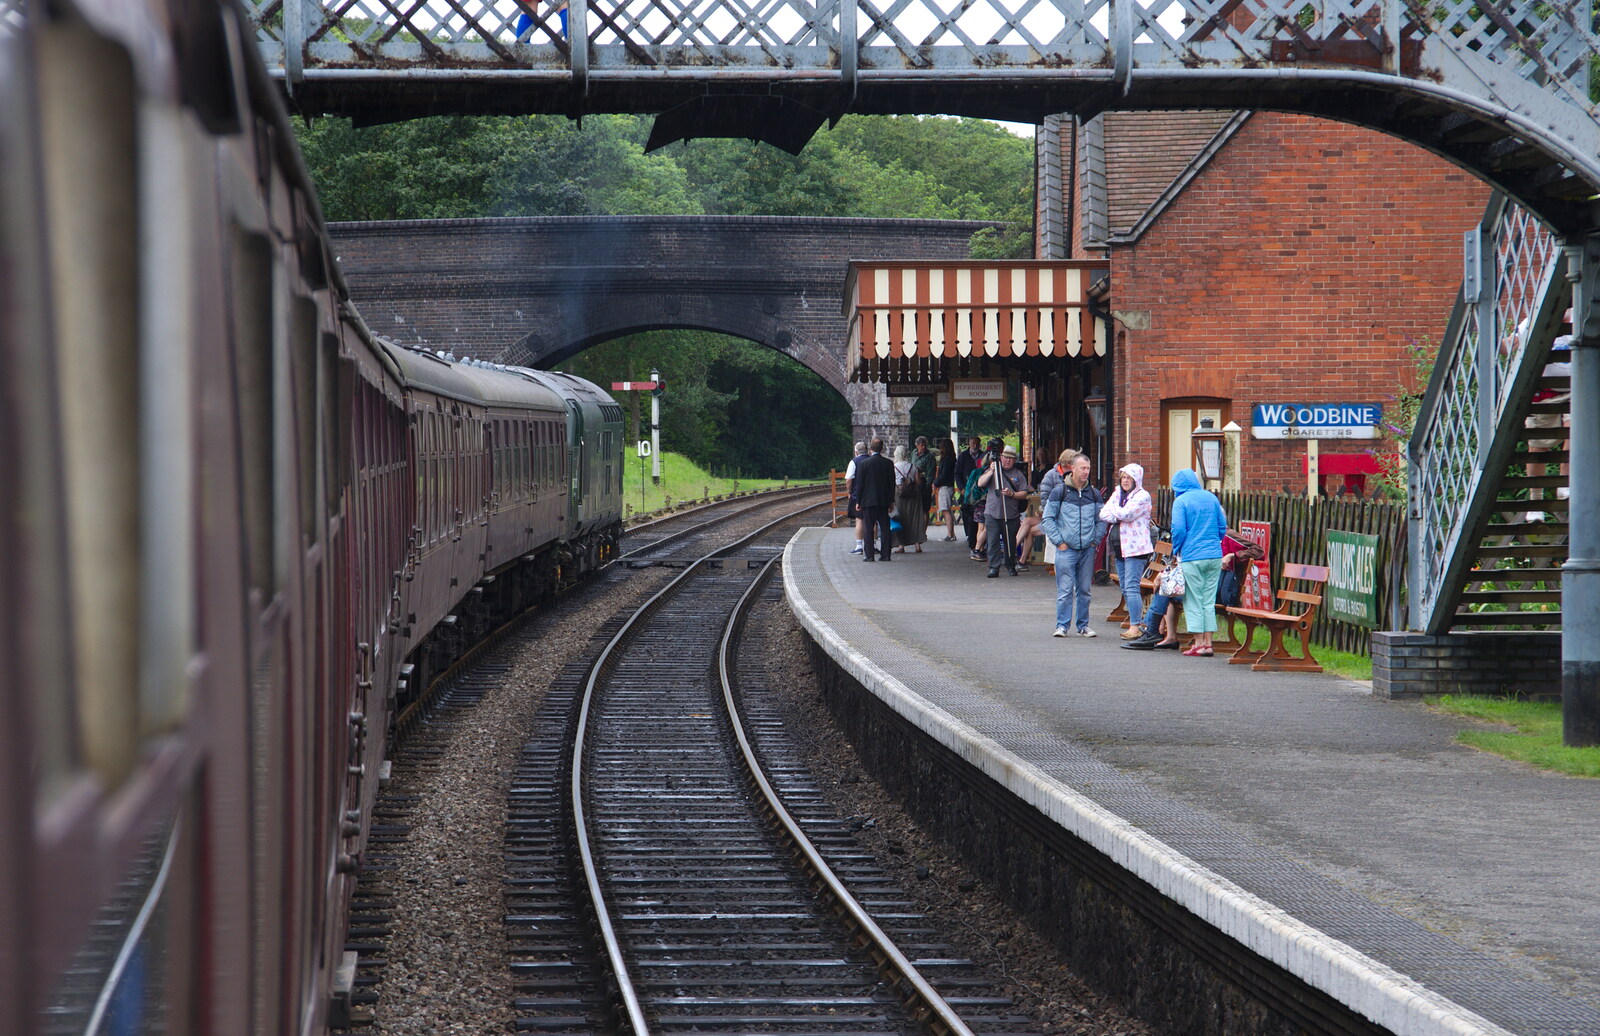 Weybourne station - Dads' Army filming location from Kelling Camping and the Potty Morris Festival, Sheringham, North Norfolk - 6th July 2019